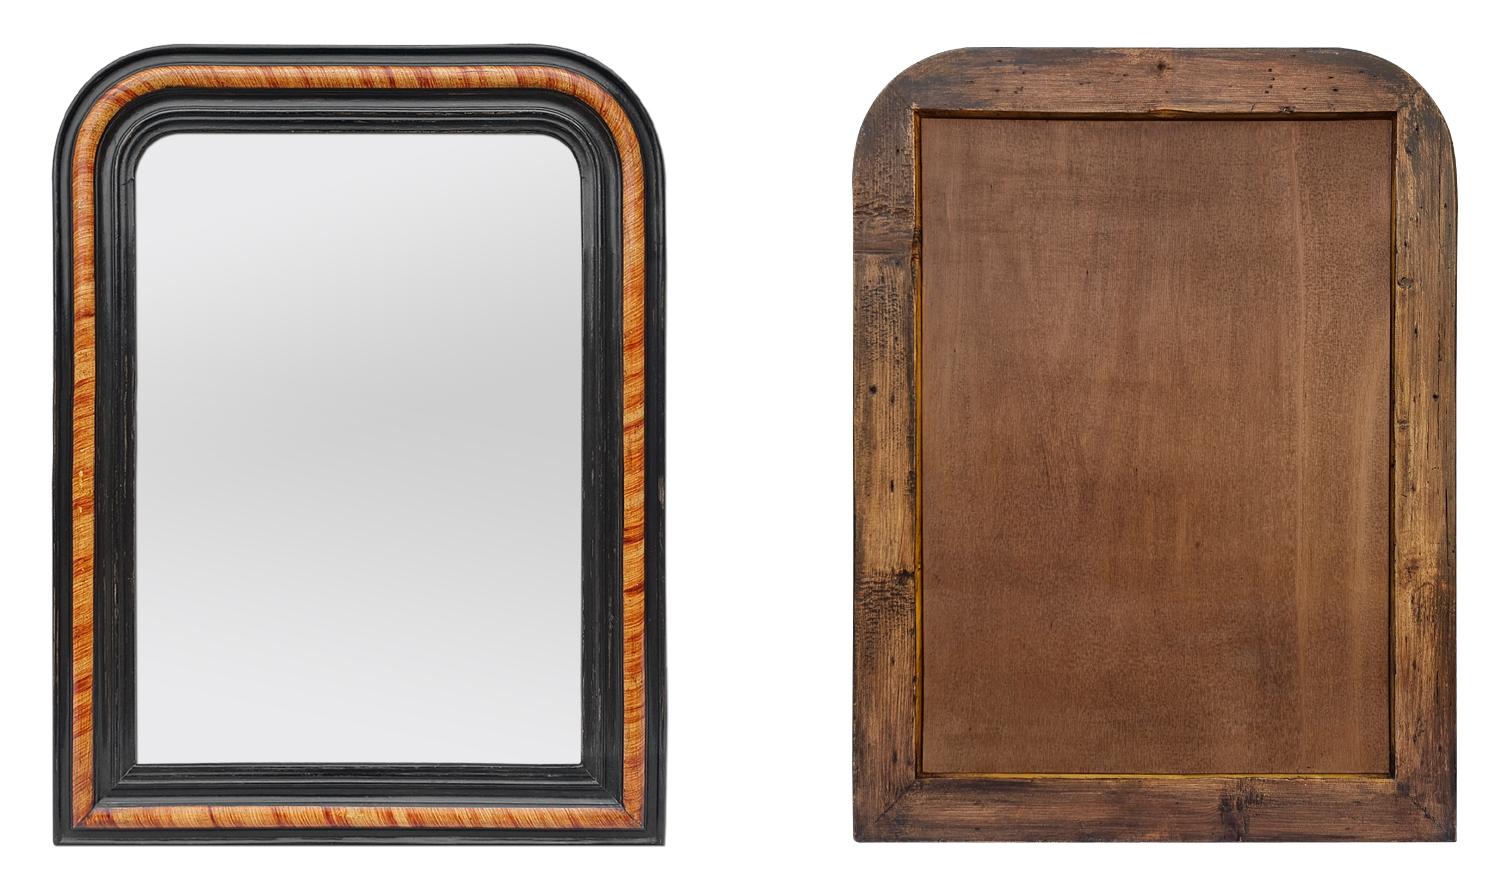 Antique French Louis-Philippe Style Mirror With Imitation Wood Decor, circa 1880 For Sale 2